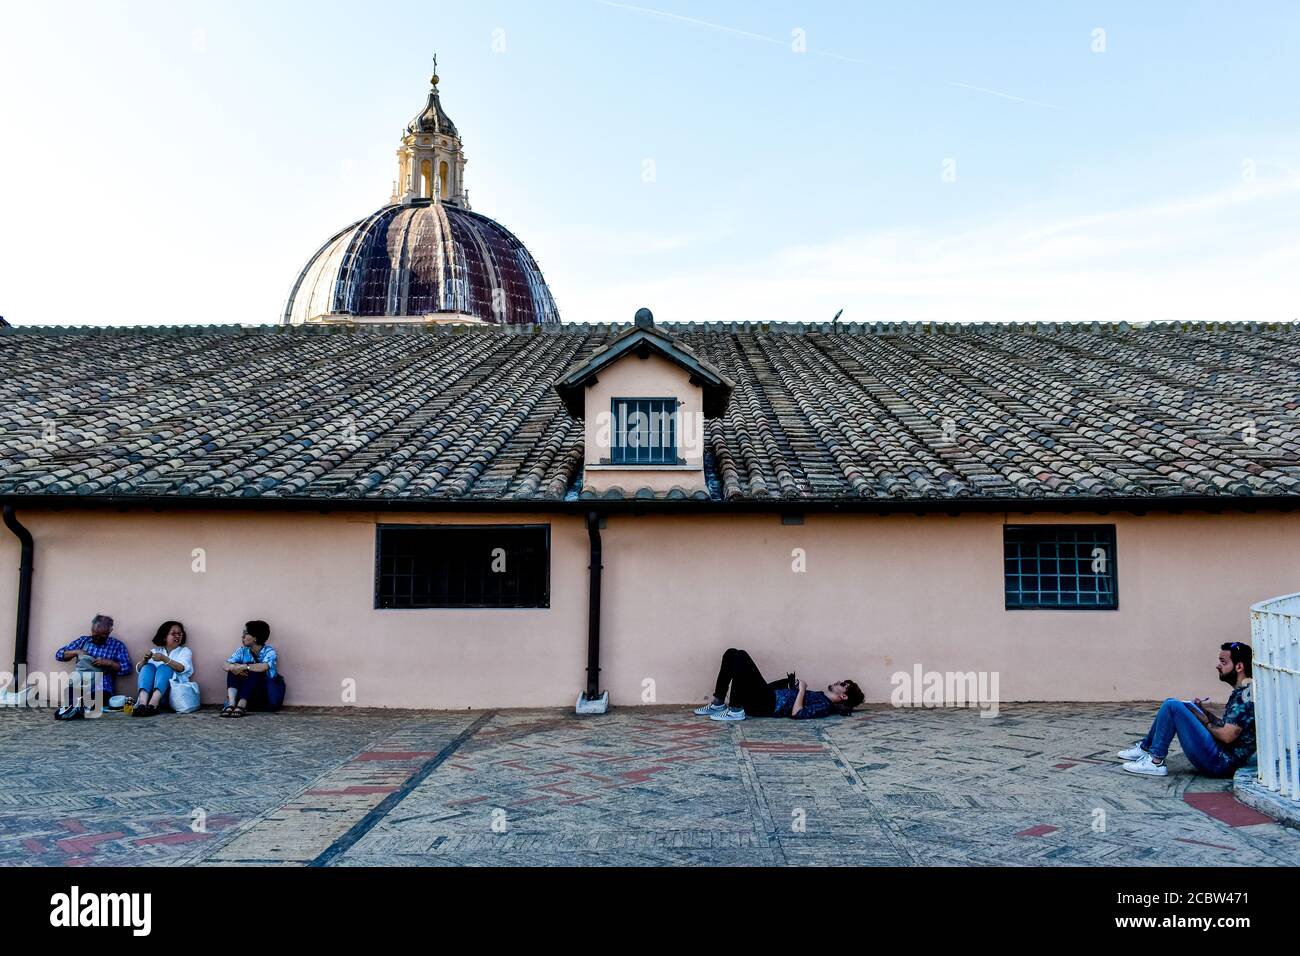 Visitors resting at the rooftop of St. Peter's Basilica Stock Photo